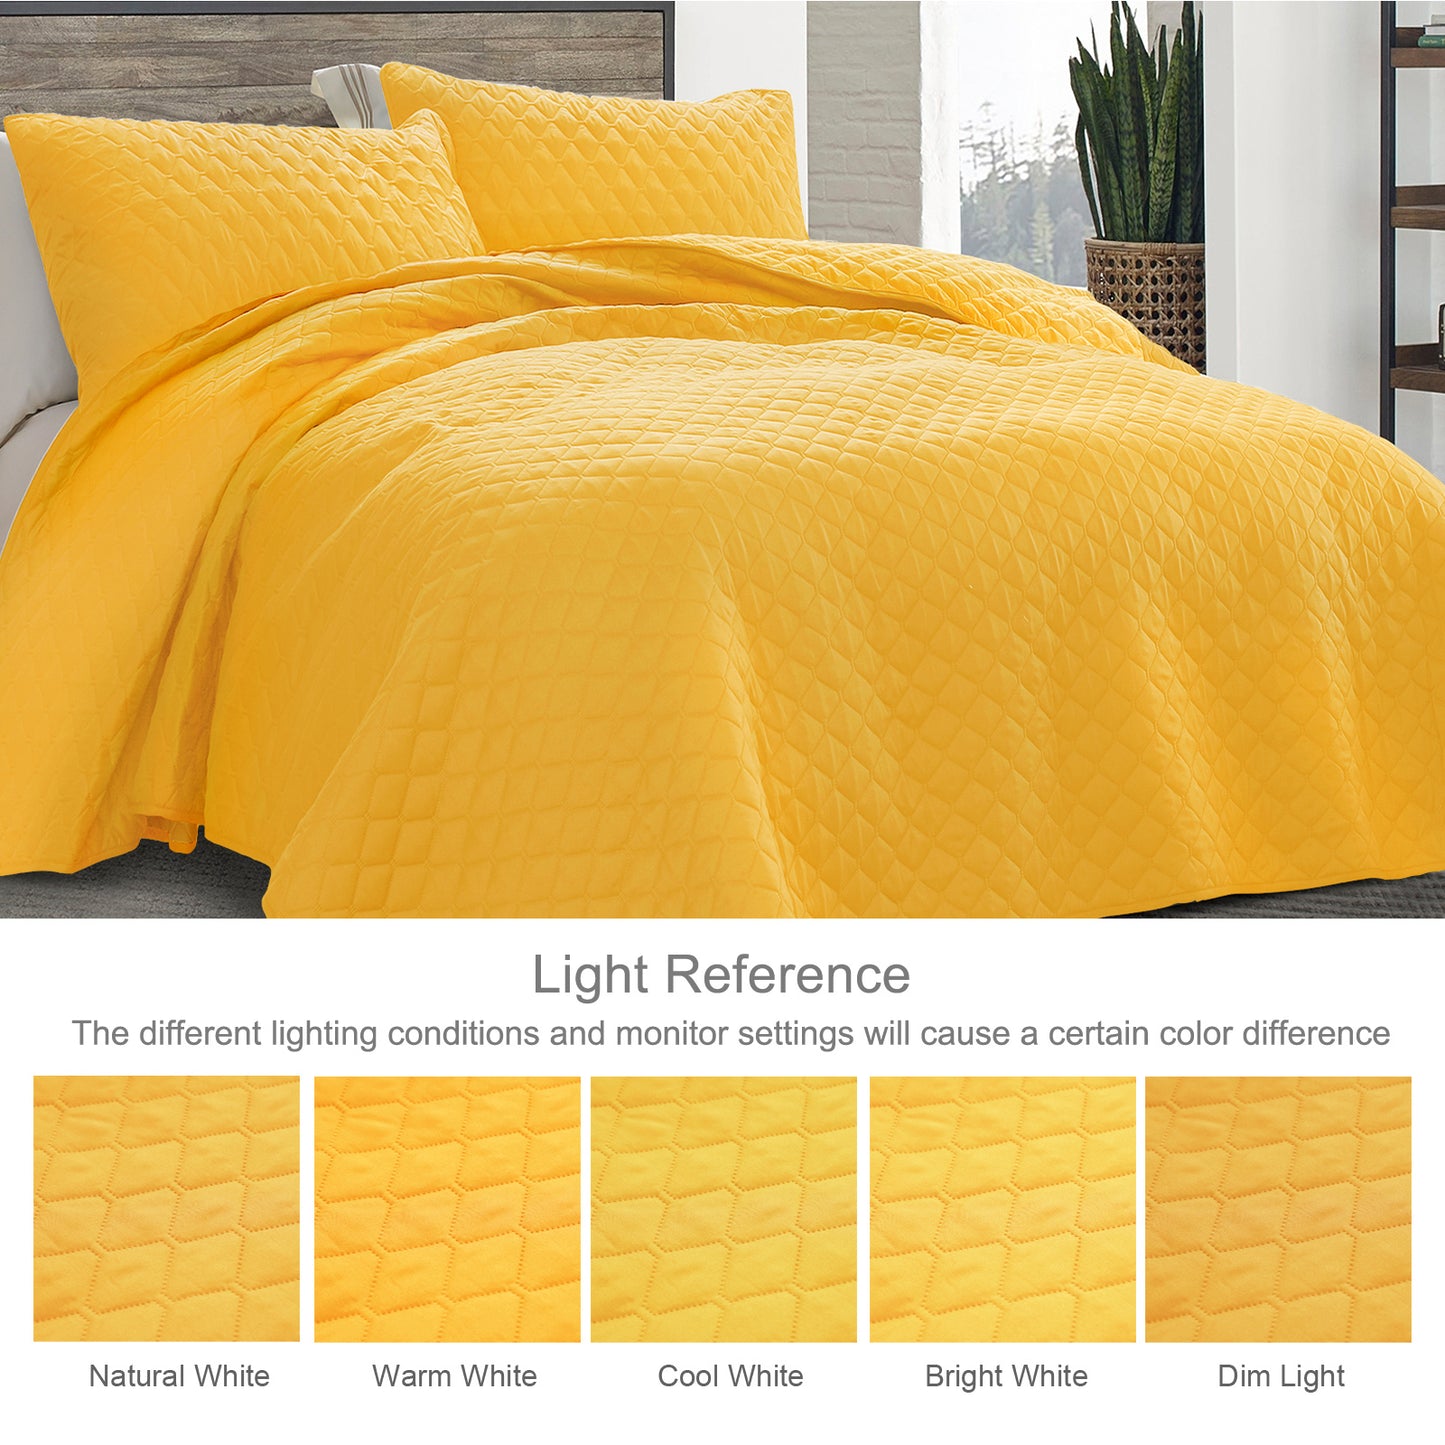 Exclusivo Mezcla Ultrasonic Reversible Twin Quilt Bedding Set with Pillow Sham, Lightweight Quilts Twin Size, Soft Bedspreads Bed Coverlets for All Seasons - (Bright Yellow, 68"x88")